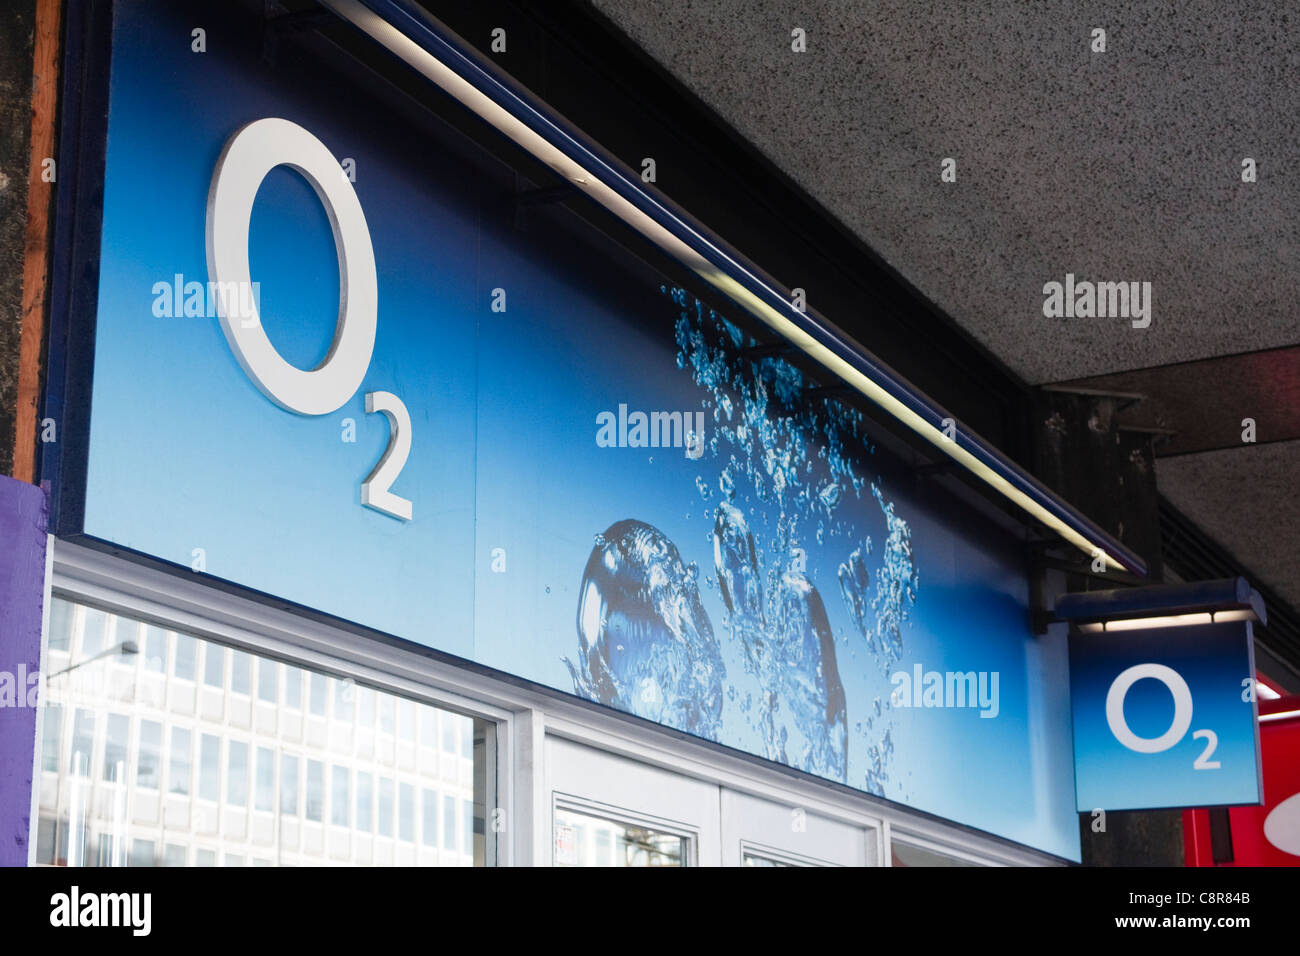 O2 Shop High Resolution Stock Photography and Images - Alamy